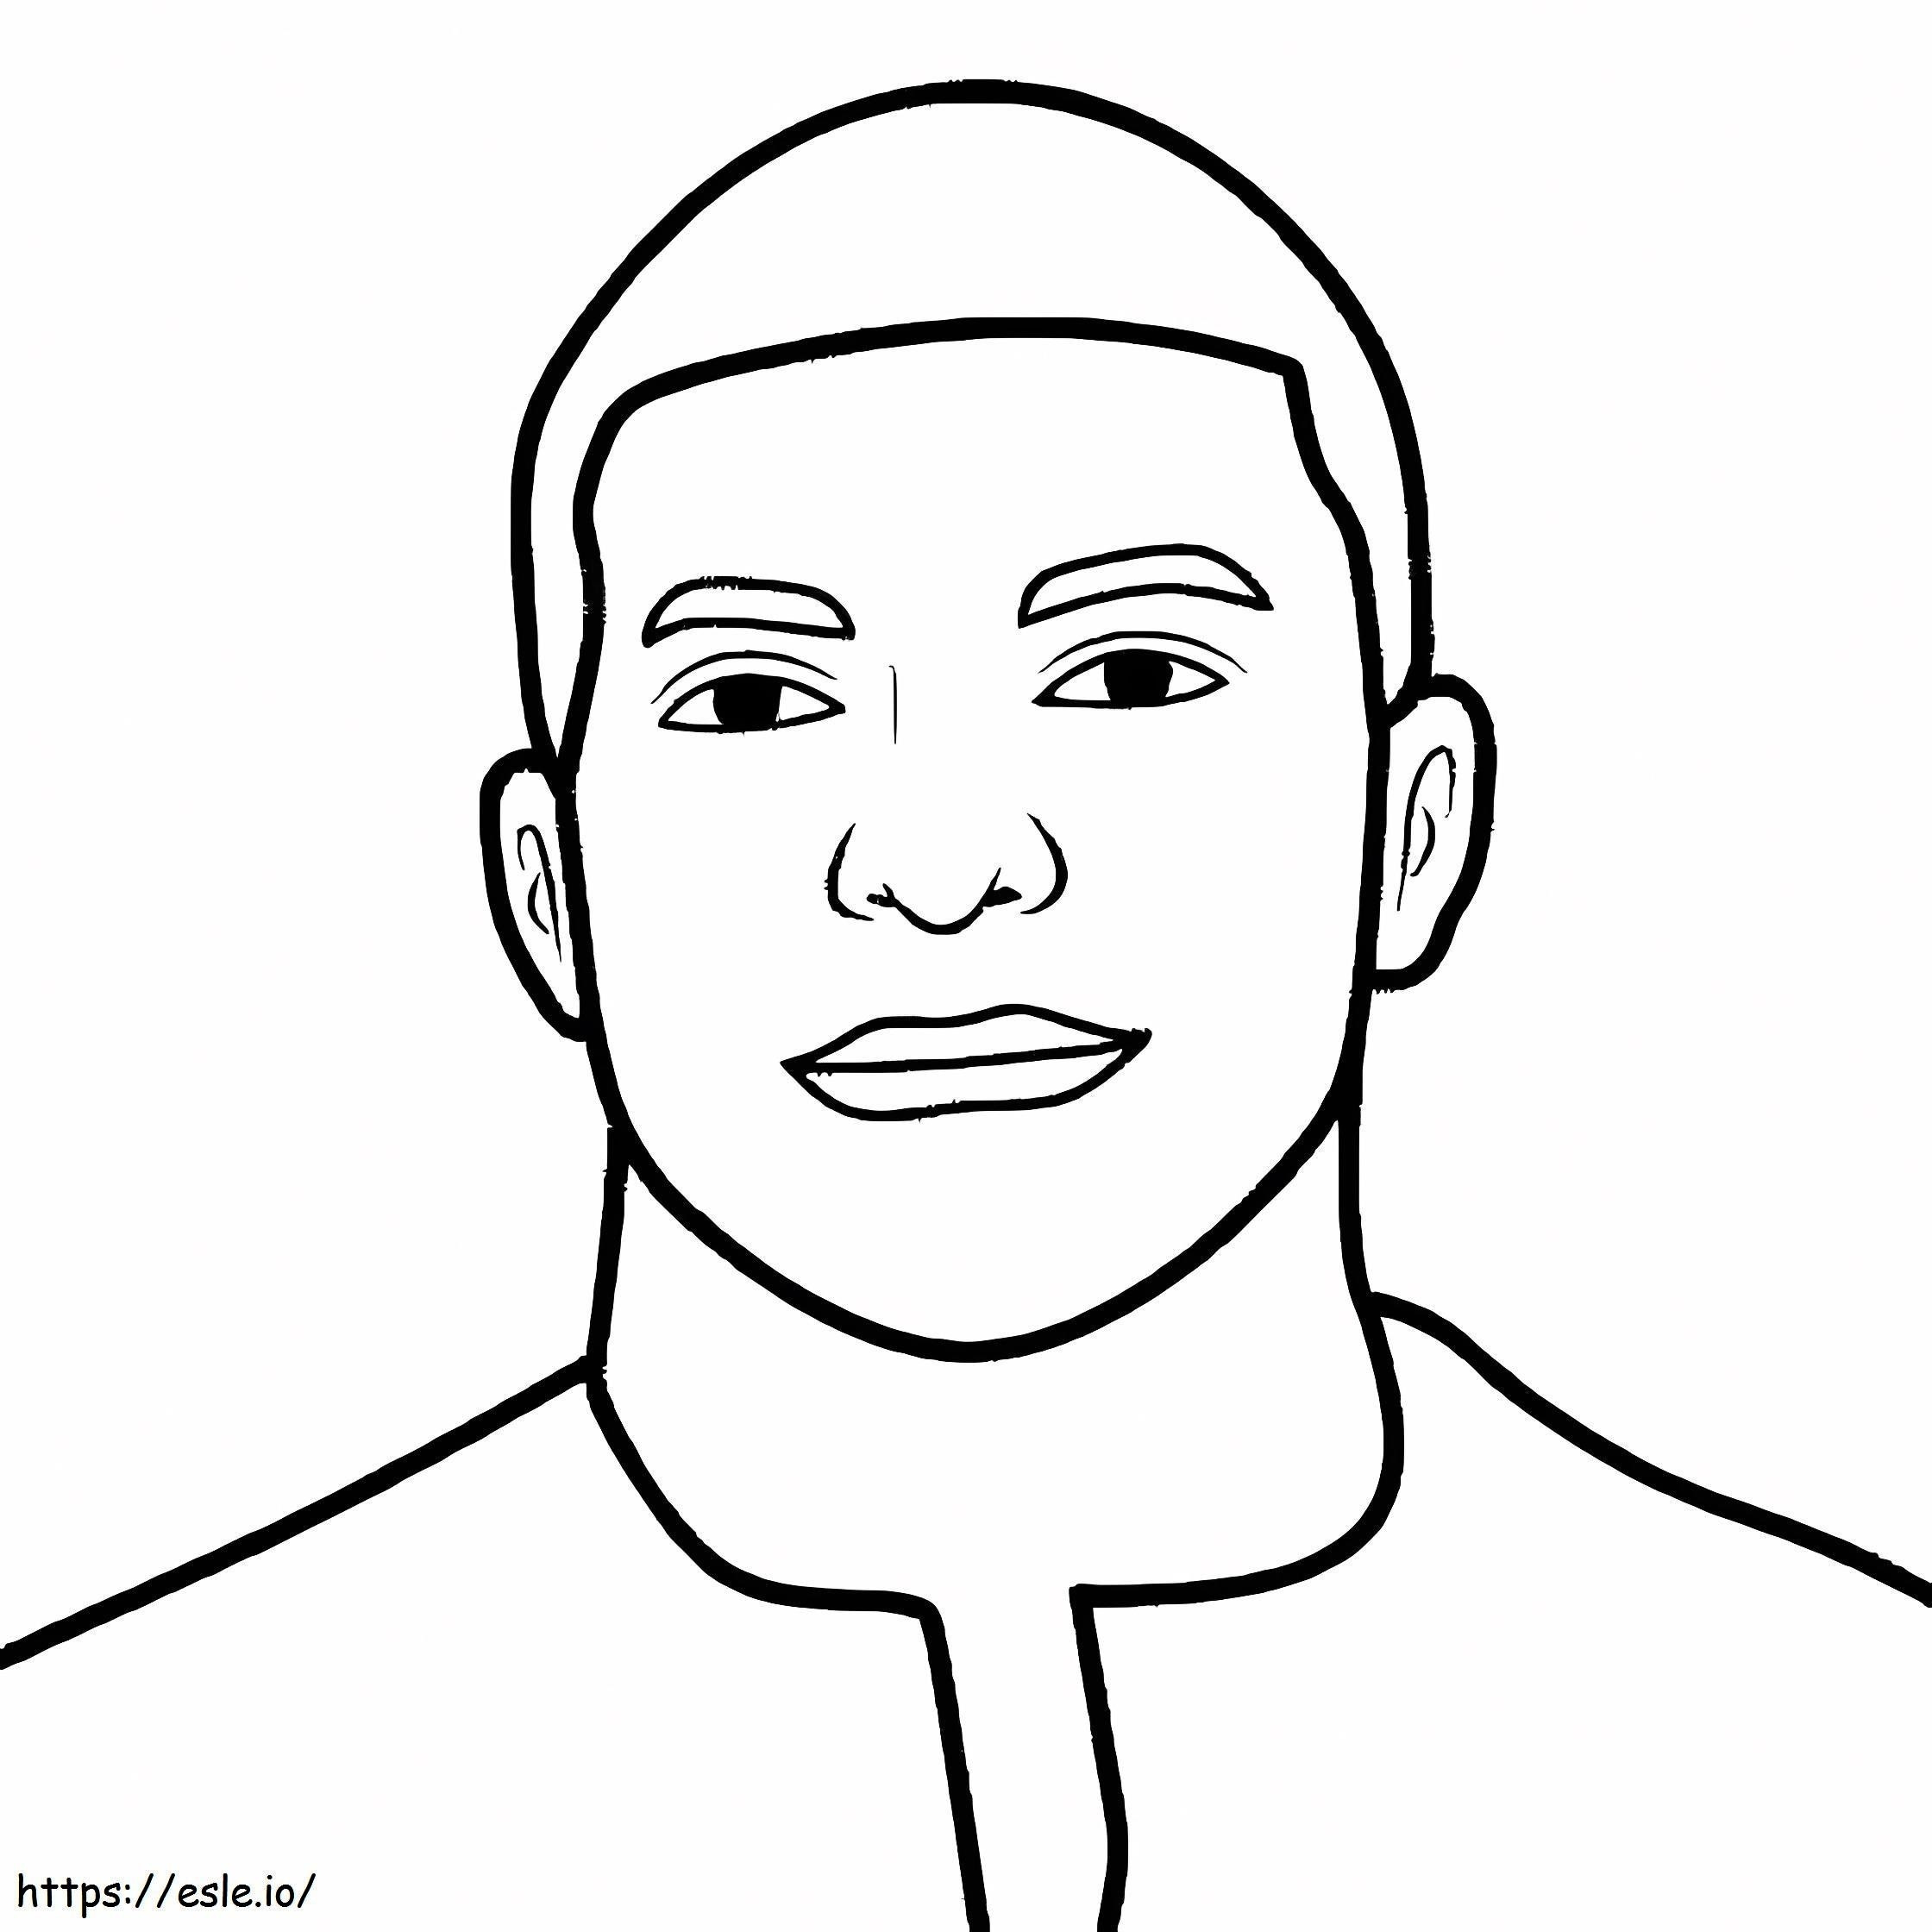 Kylian Mbappe 2 coloring page